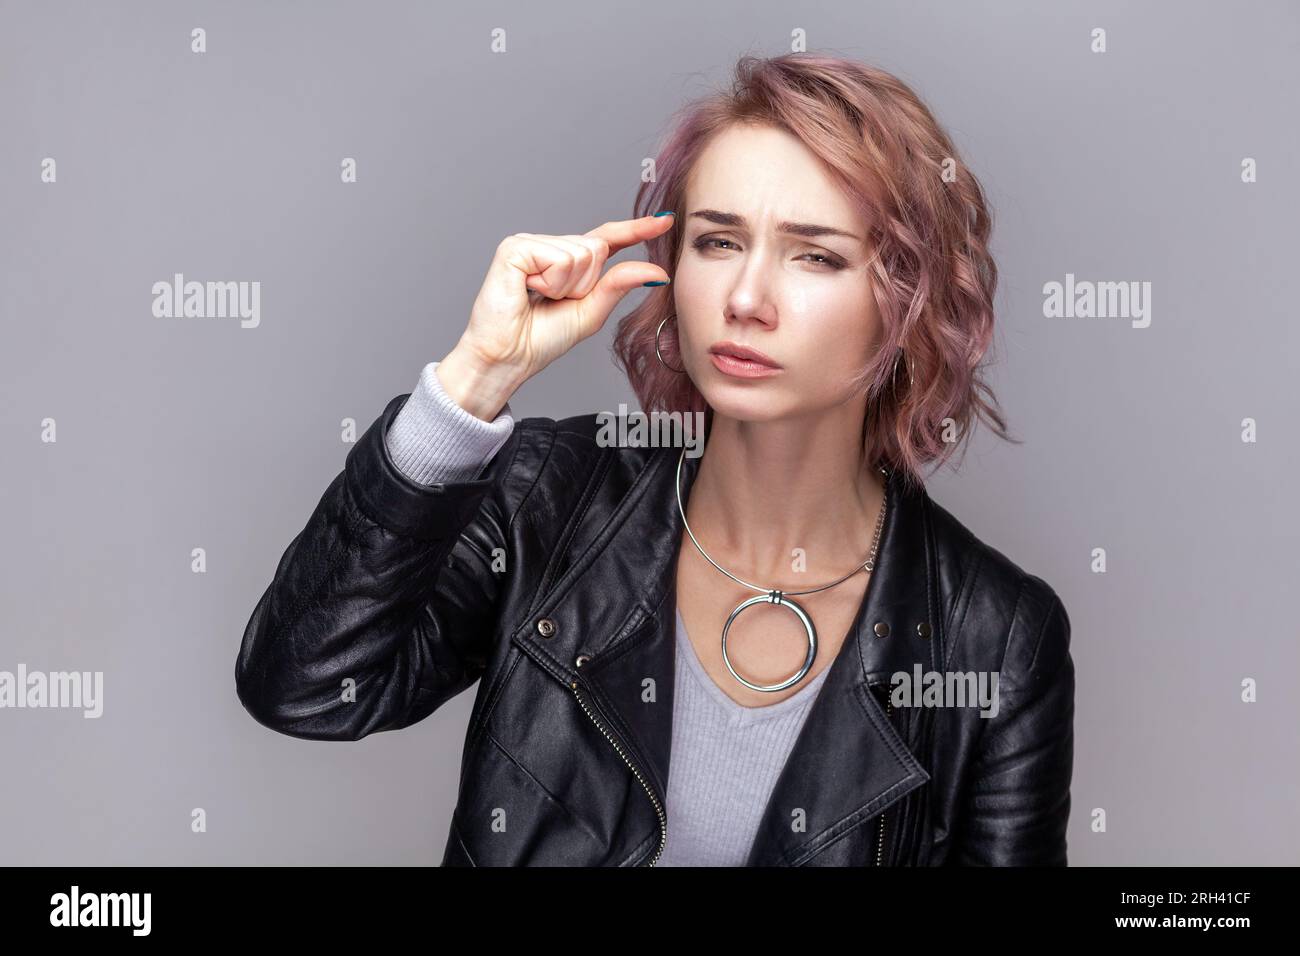 Portrait of attractive woman with short hairstyle standing looking at camera with frowning face, showing small gesture, wearing black leather jacket. Indoor studio shot isolated on grey background. Stock Photo